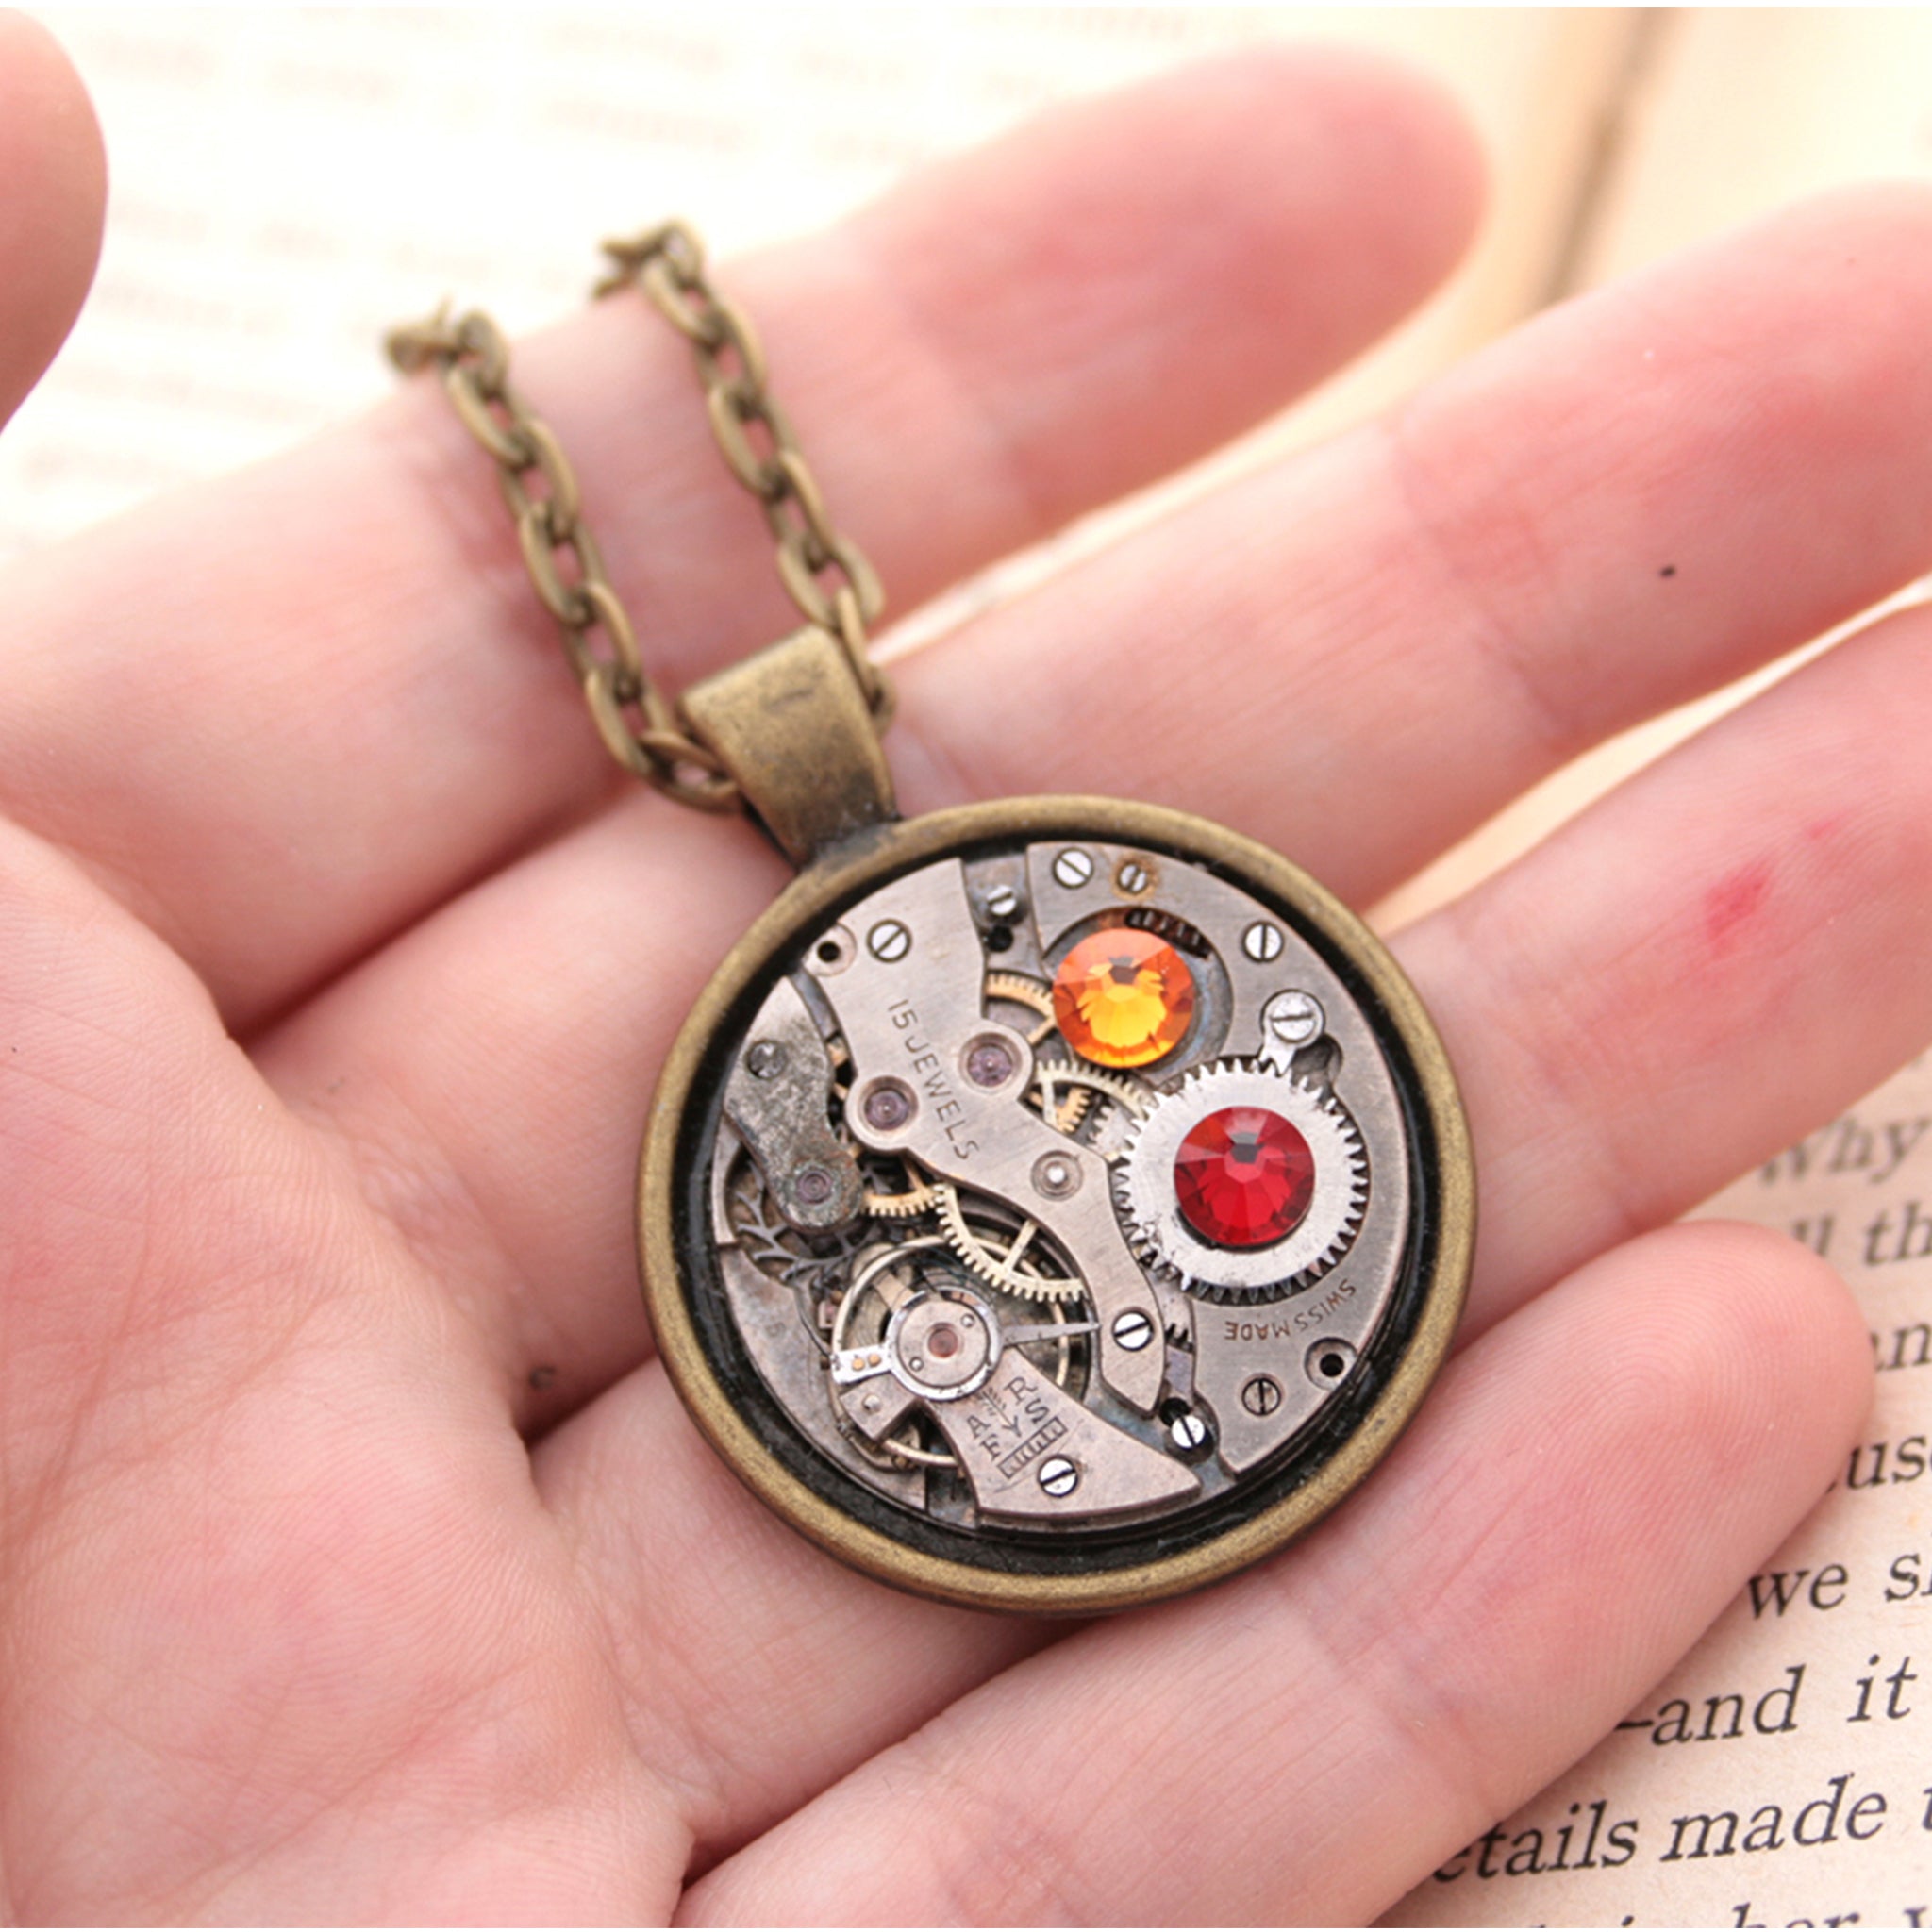 Dark academia necklace made of watch mechanism and Swarovski crystals lying on hand